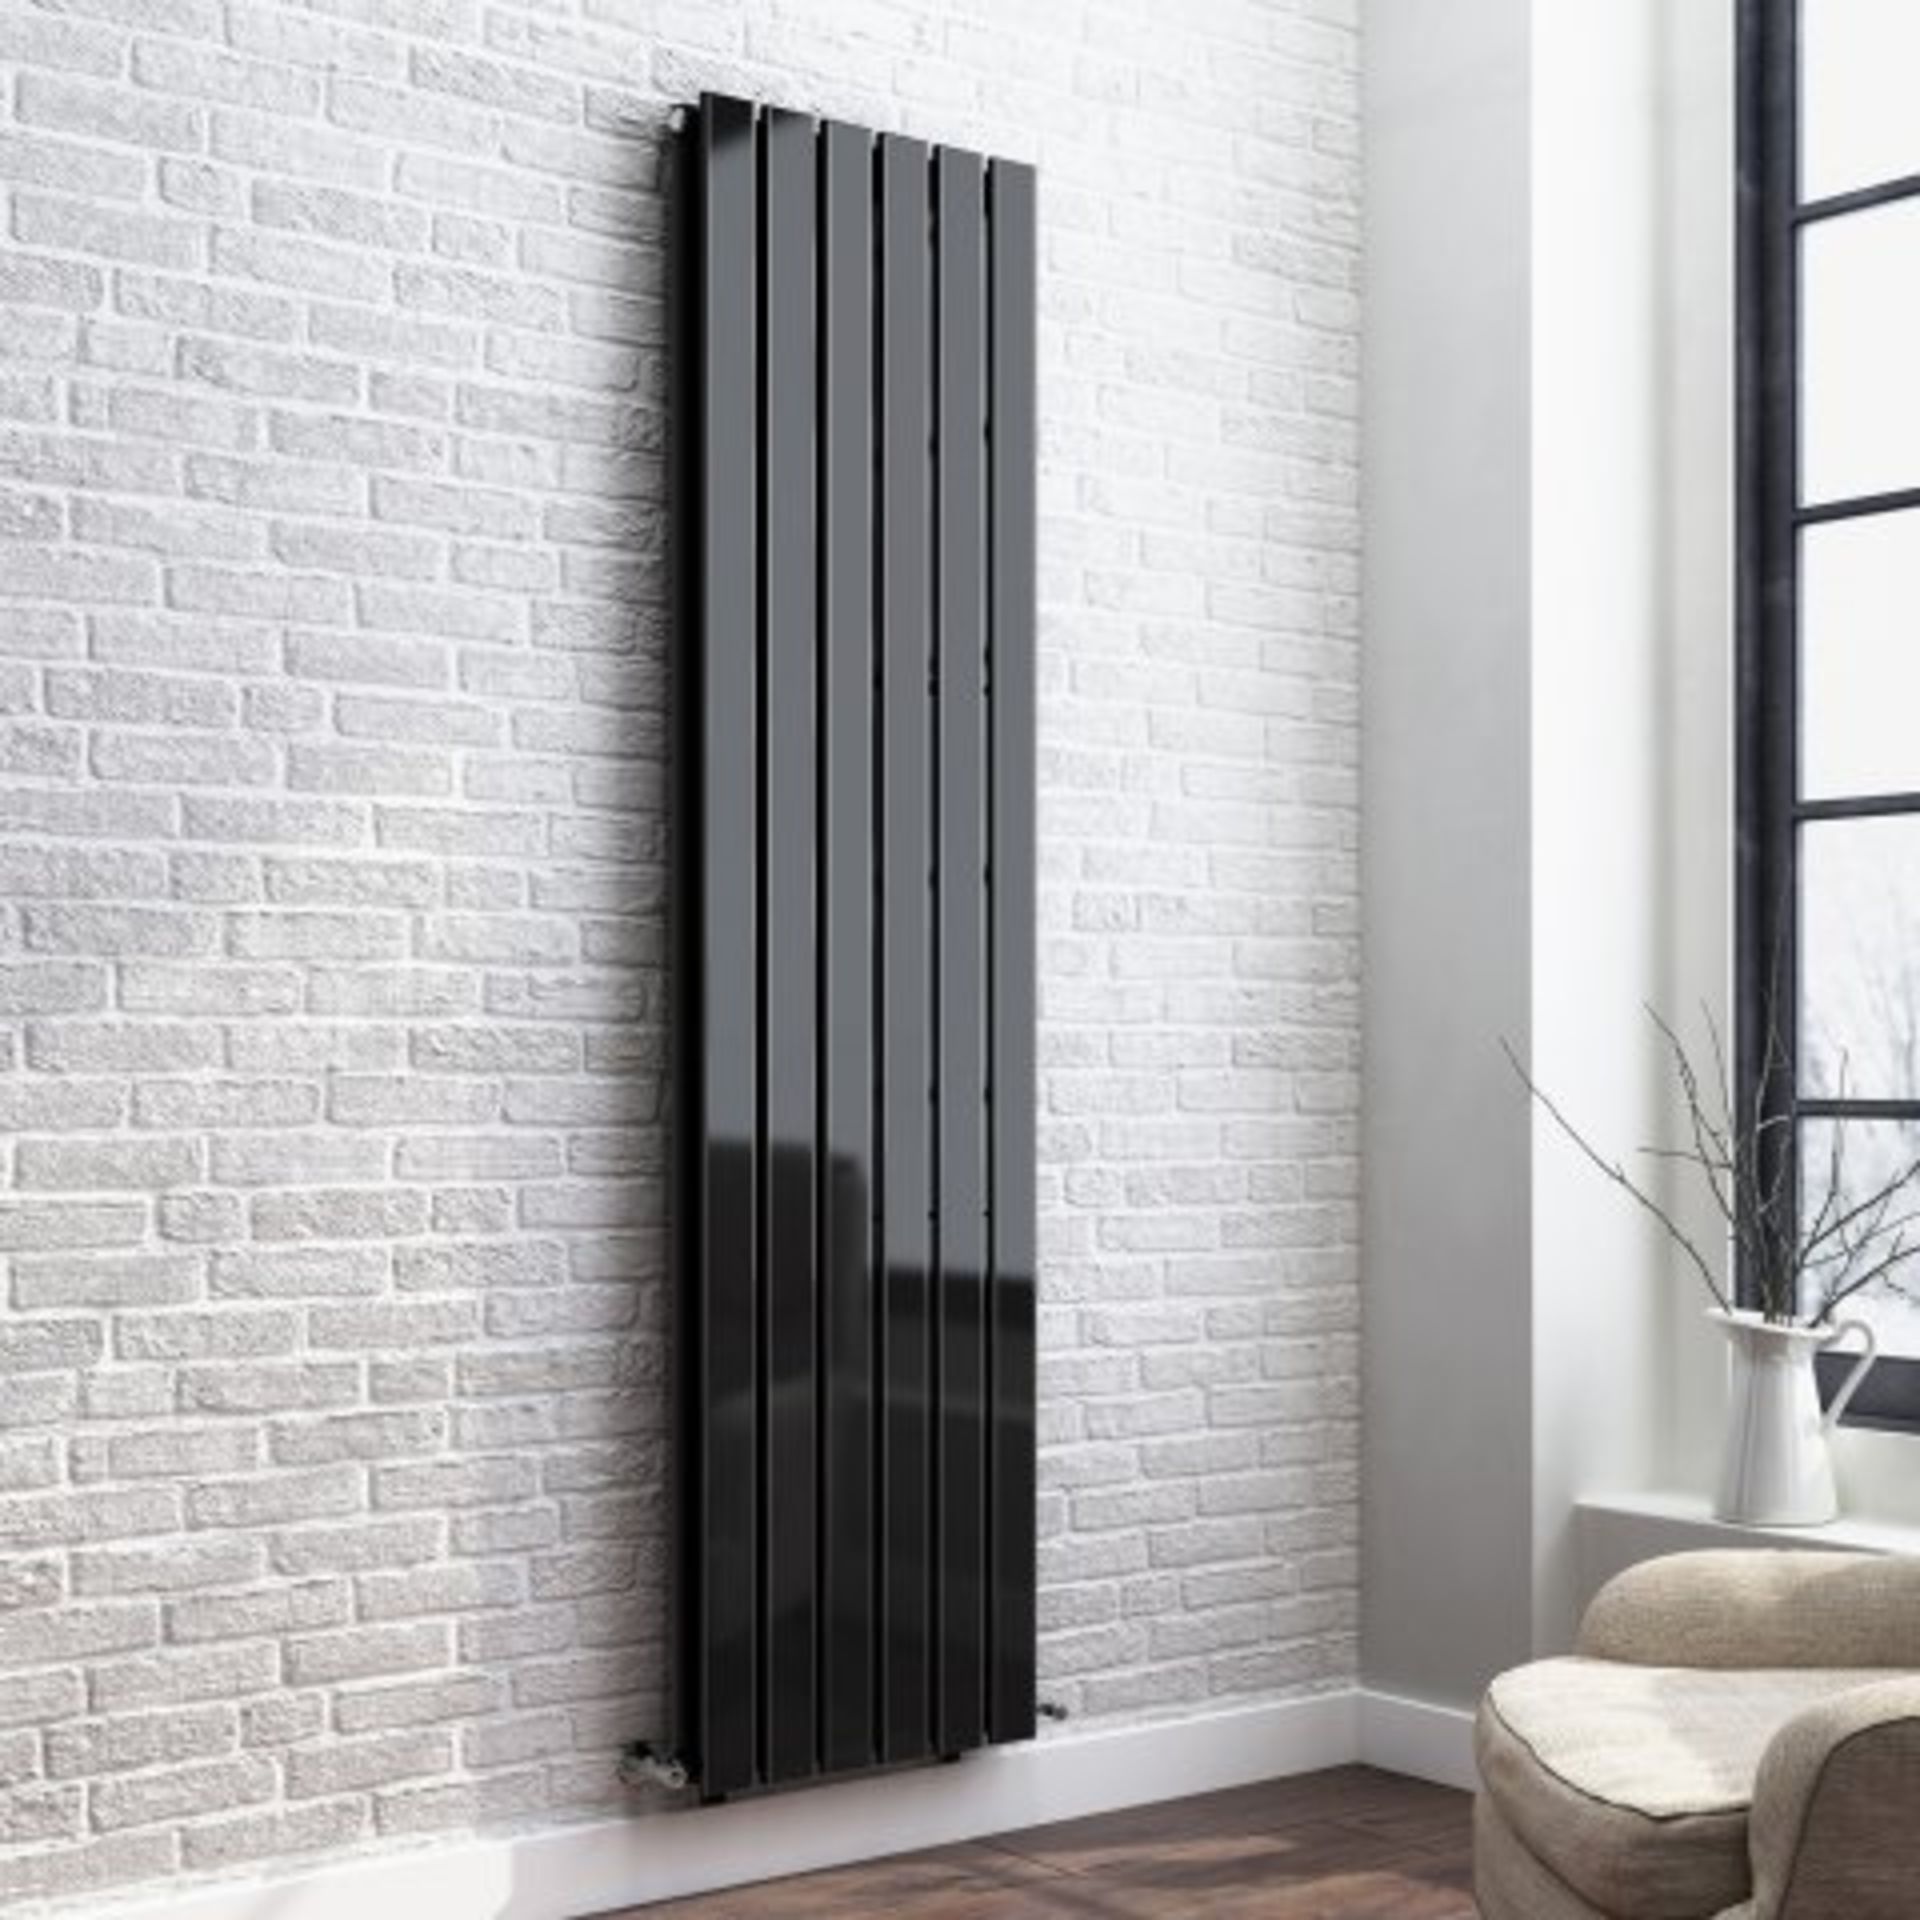 (M77) 1800x458mm Gloss Black Double Flat Panel Vertical Radiator - Thera Range. RRP £524.99. Our - Image 2 of 4